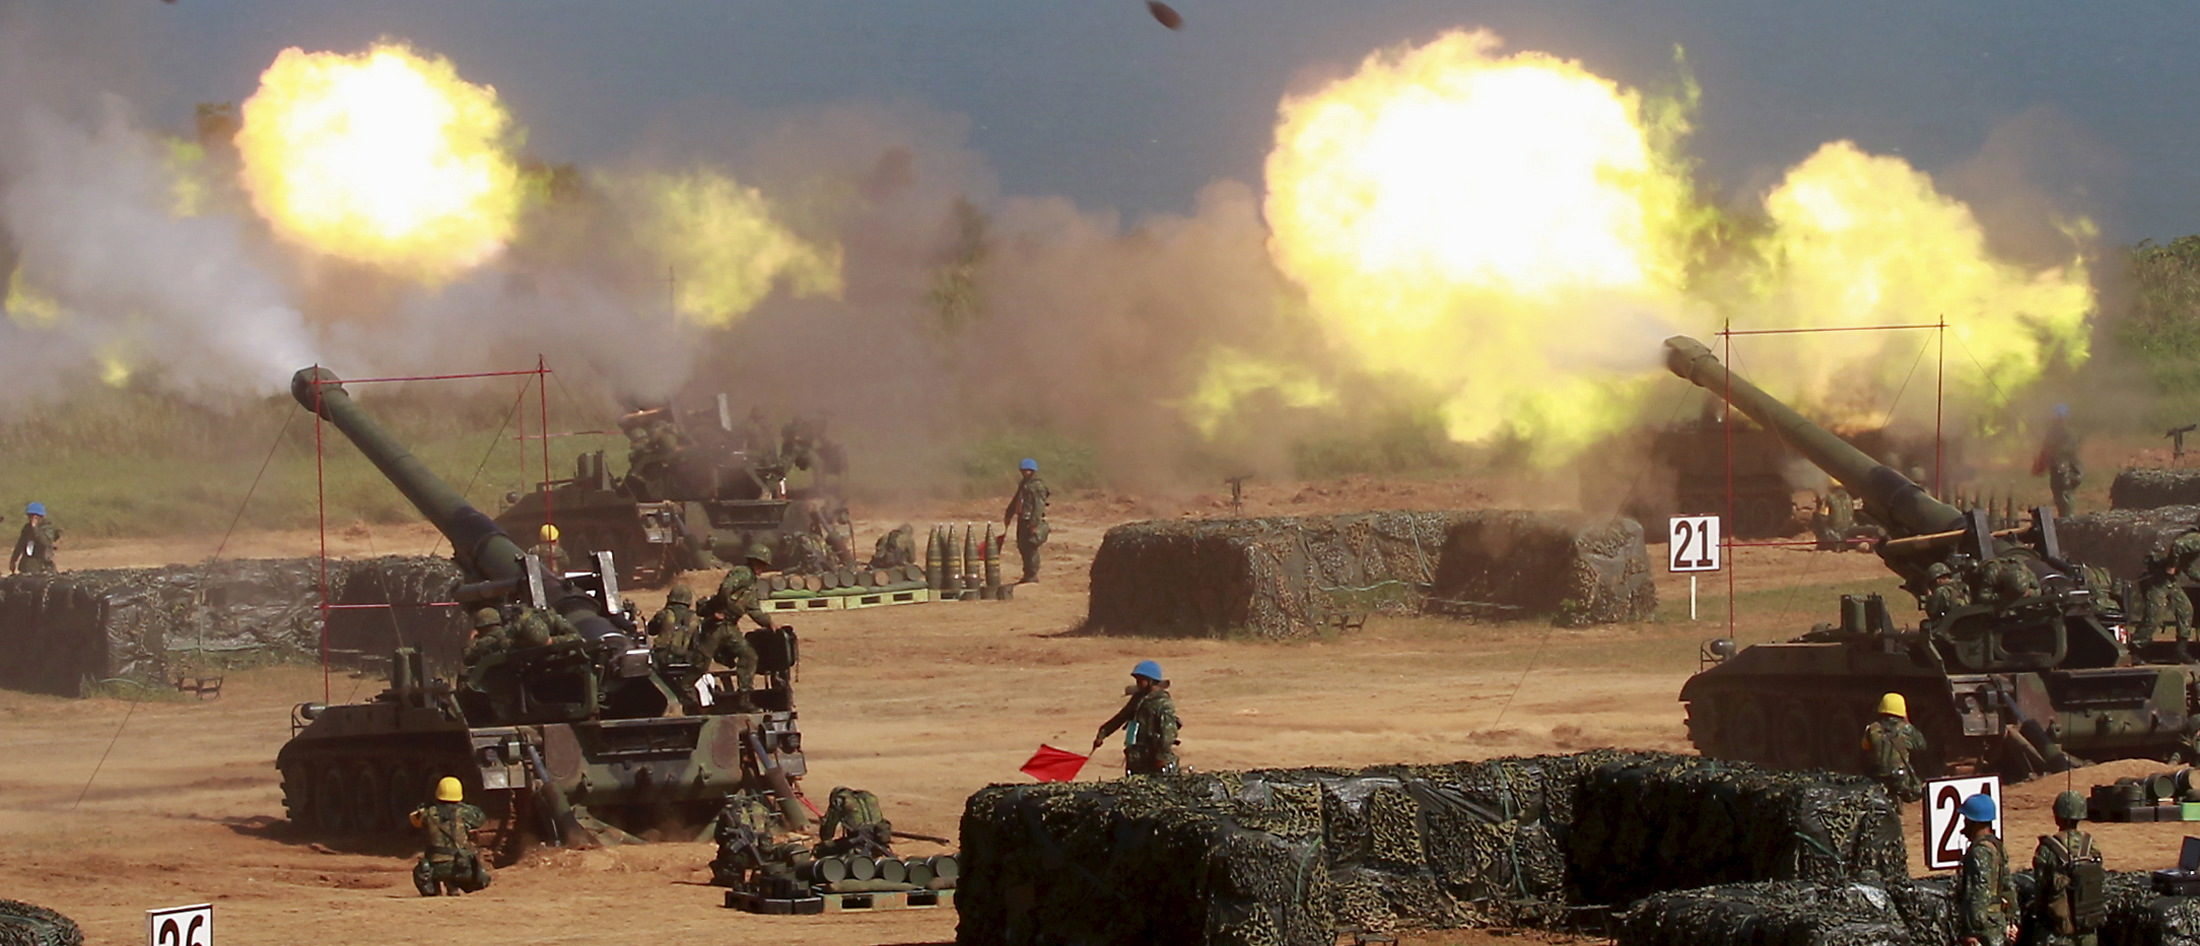 Soldiers fire M110 203mm howitzers during the annual Han Kuang military exercise in Hsinchu county, northern Taiwan, September 10, 2015. (REUTERS/Pichi Chuang)